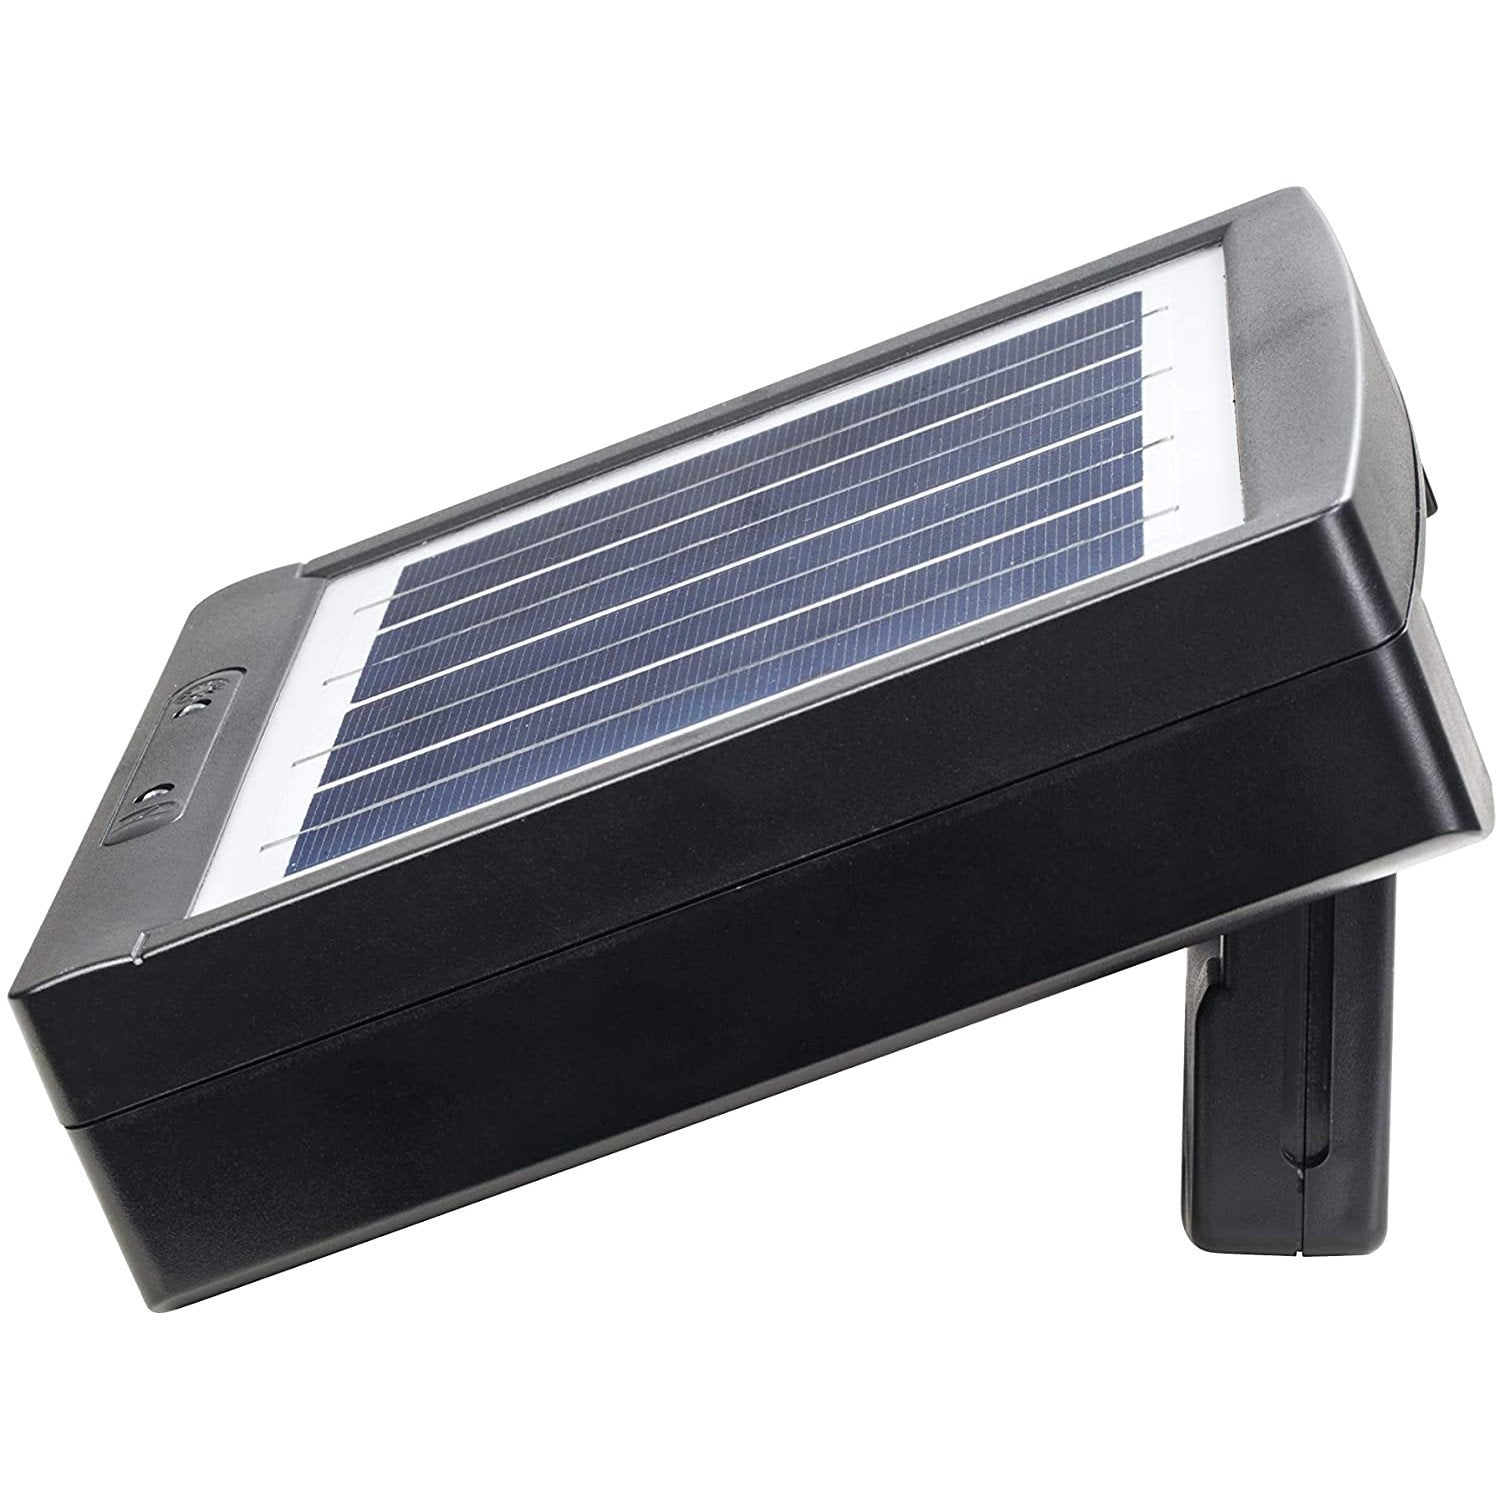 Sunway Solar Rechargeable Batteries Charger for AAA, AA & 9V